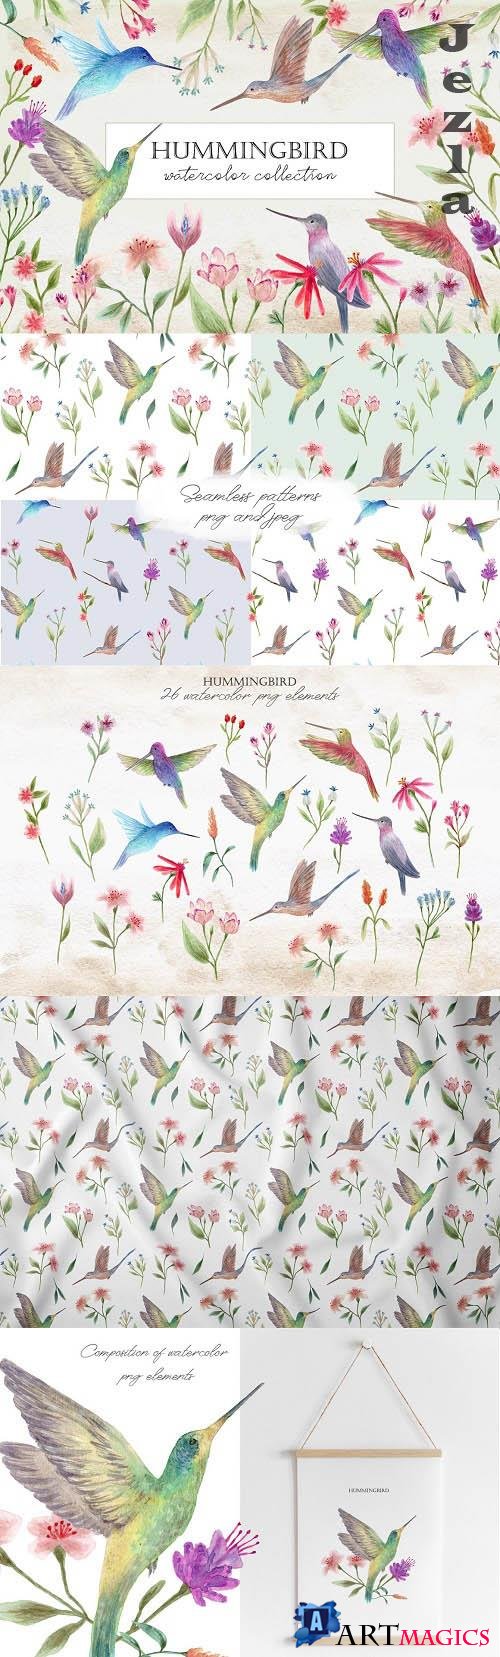 Hummingbirds. Cliparts and Patterns - 6526299